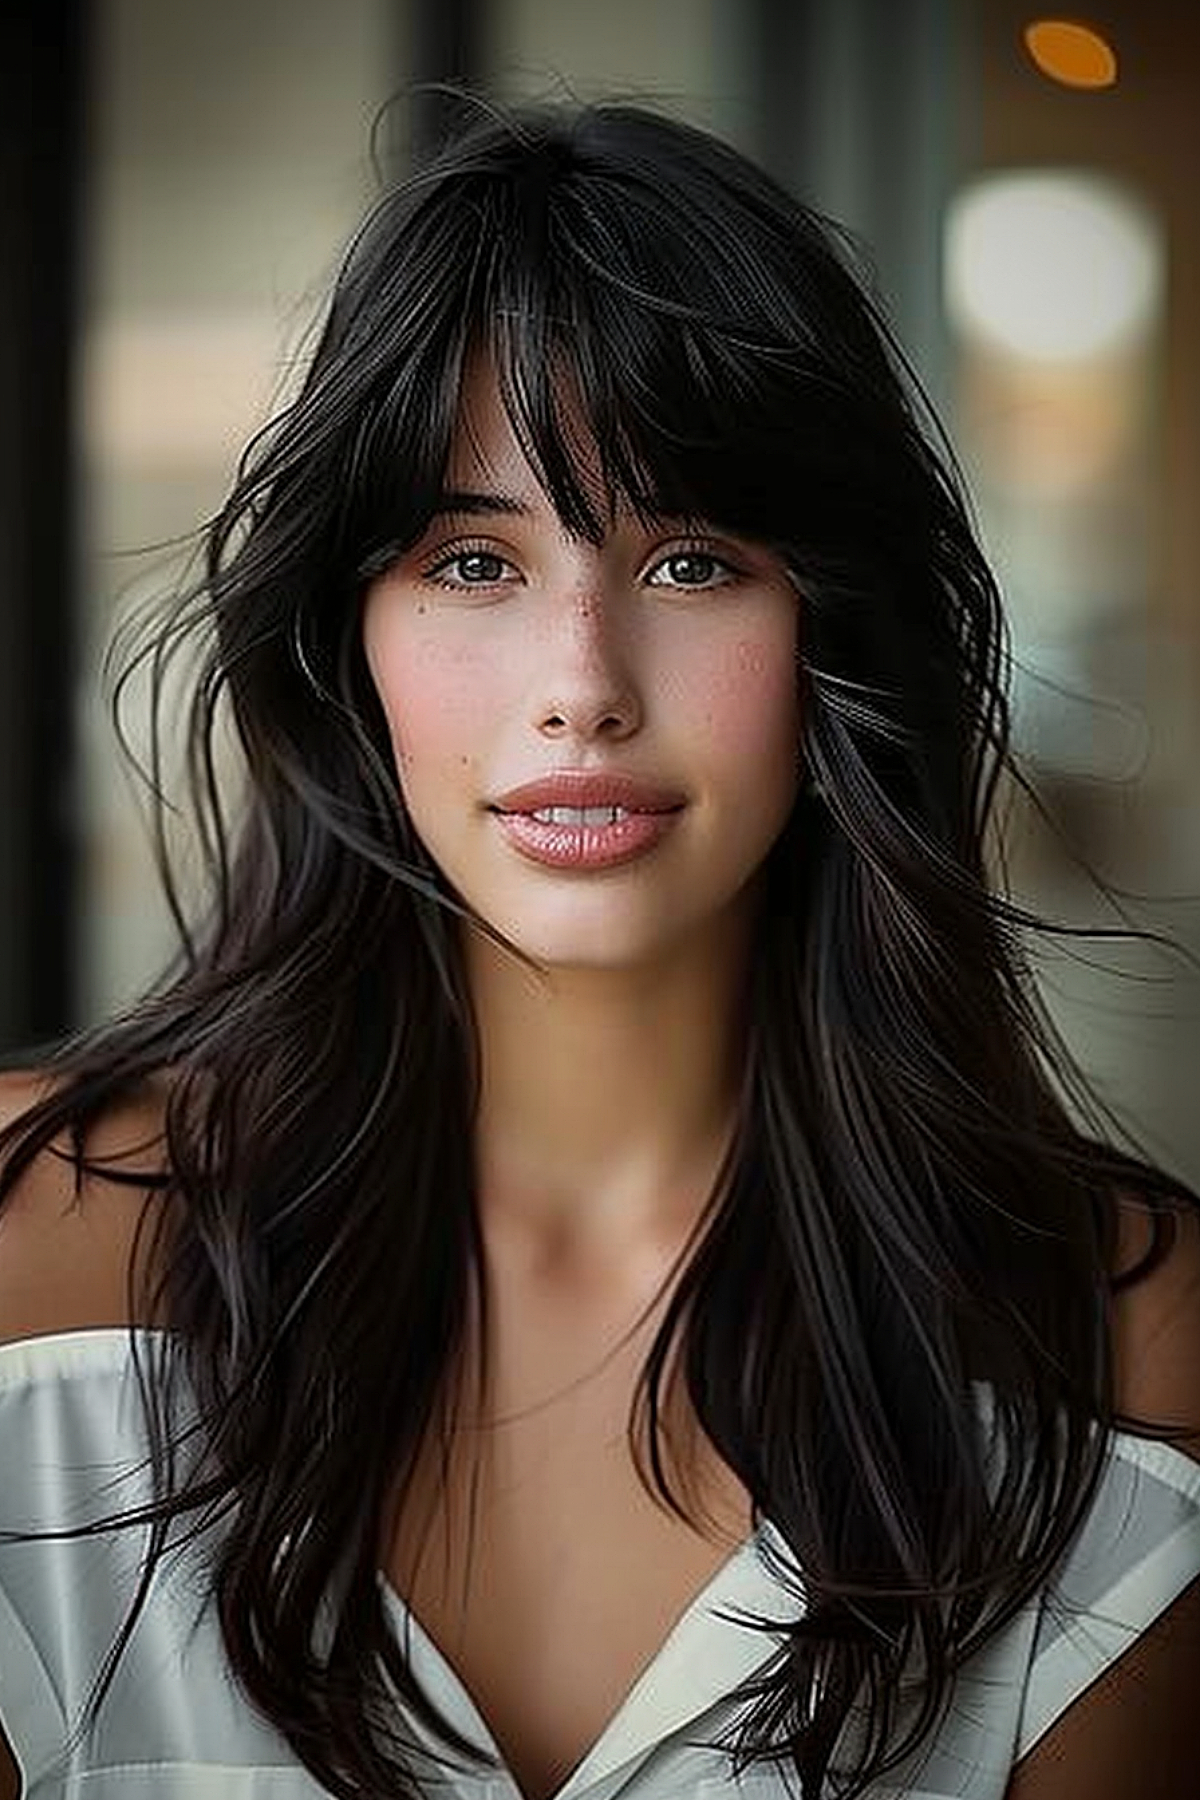 Her long black hair has round bangs that soften and balance her long facial features.